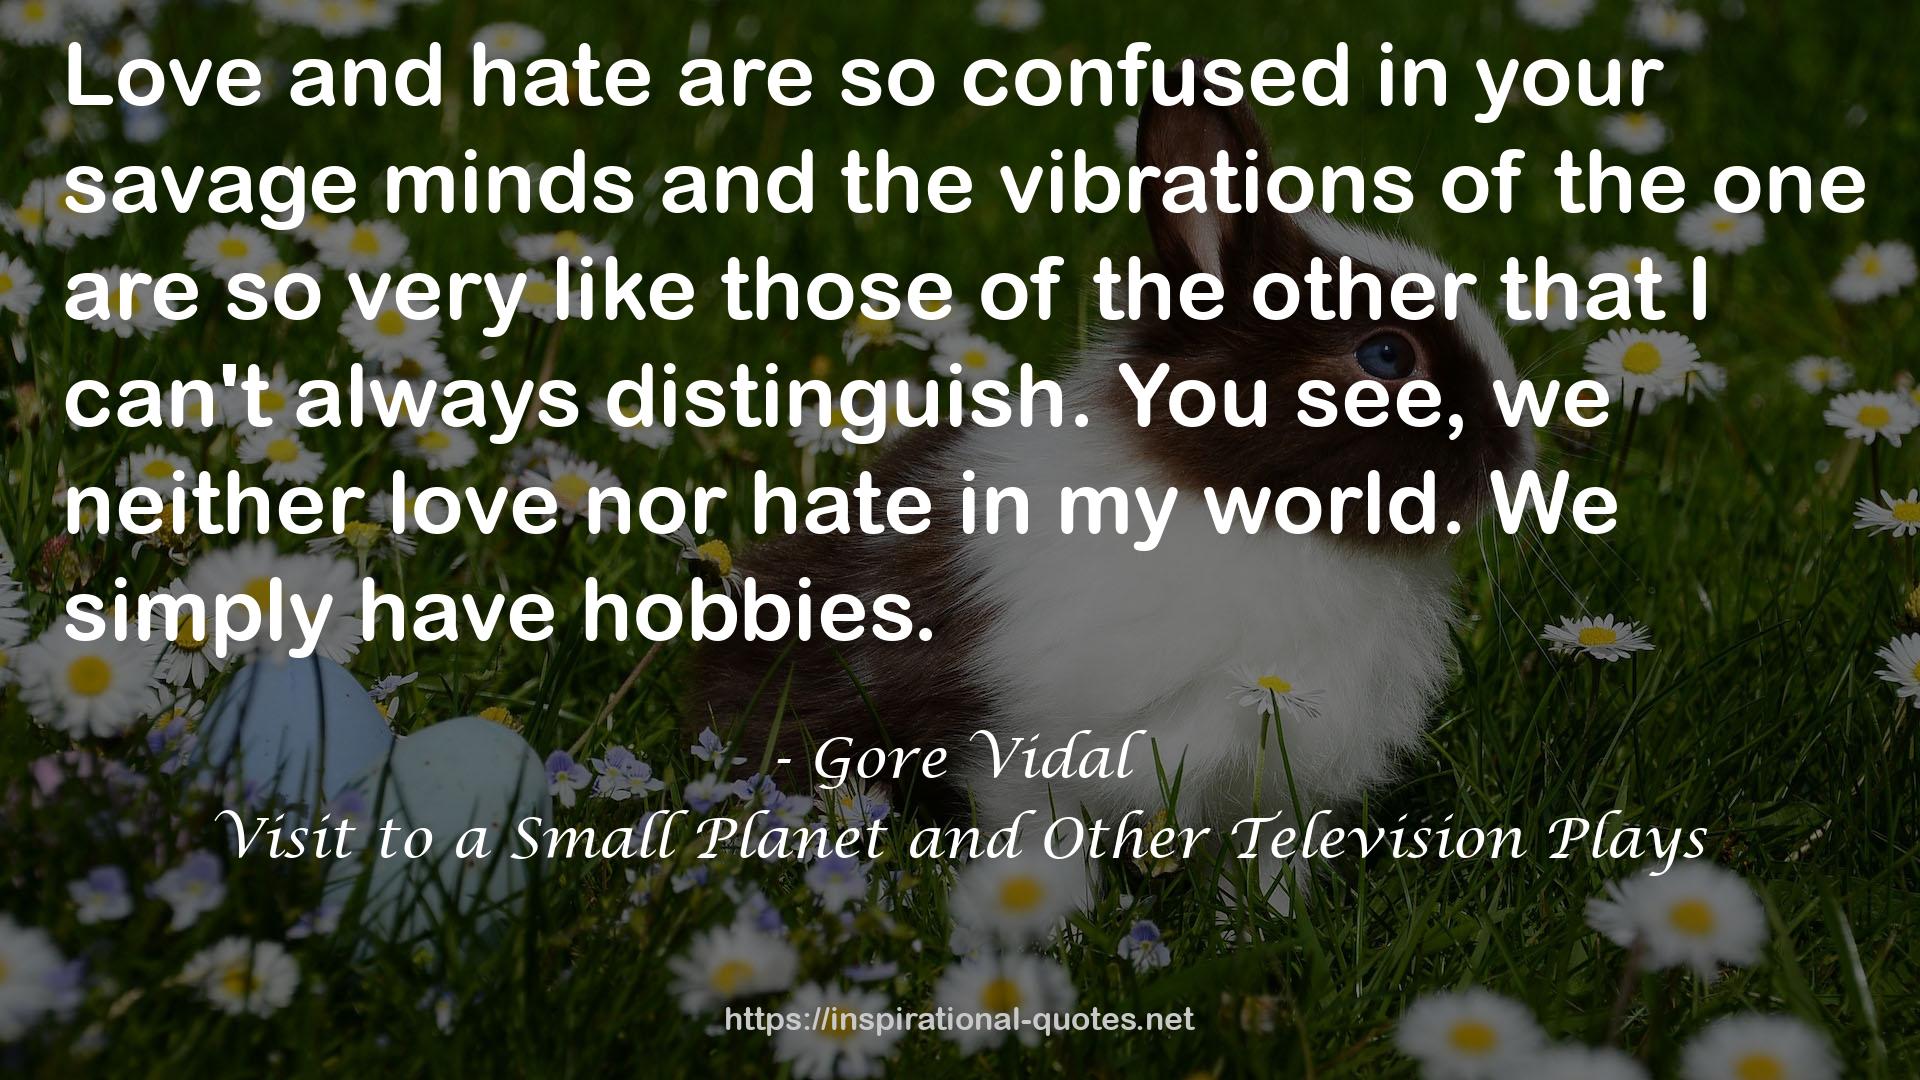 Visit to a Small Planet and Other Television Plays QUOTES